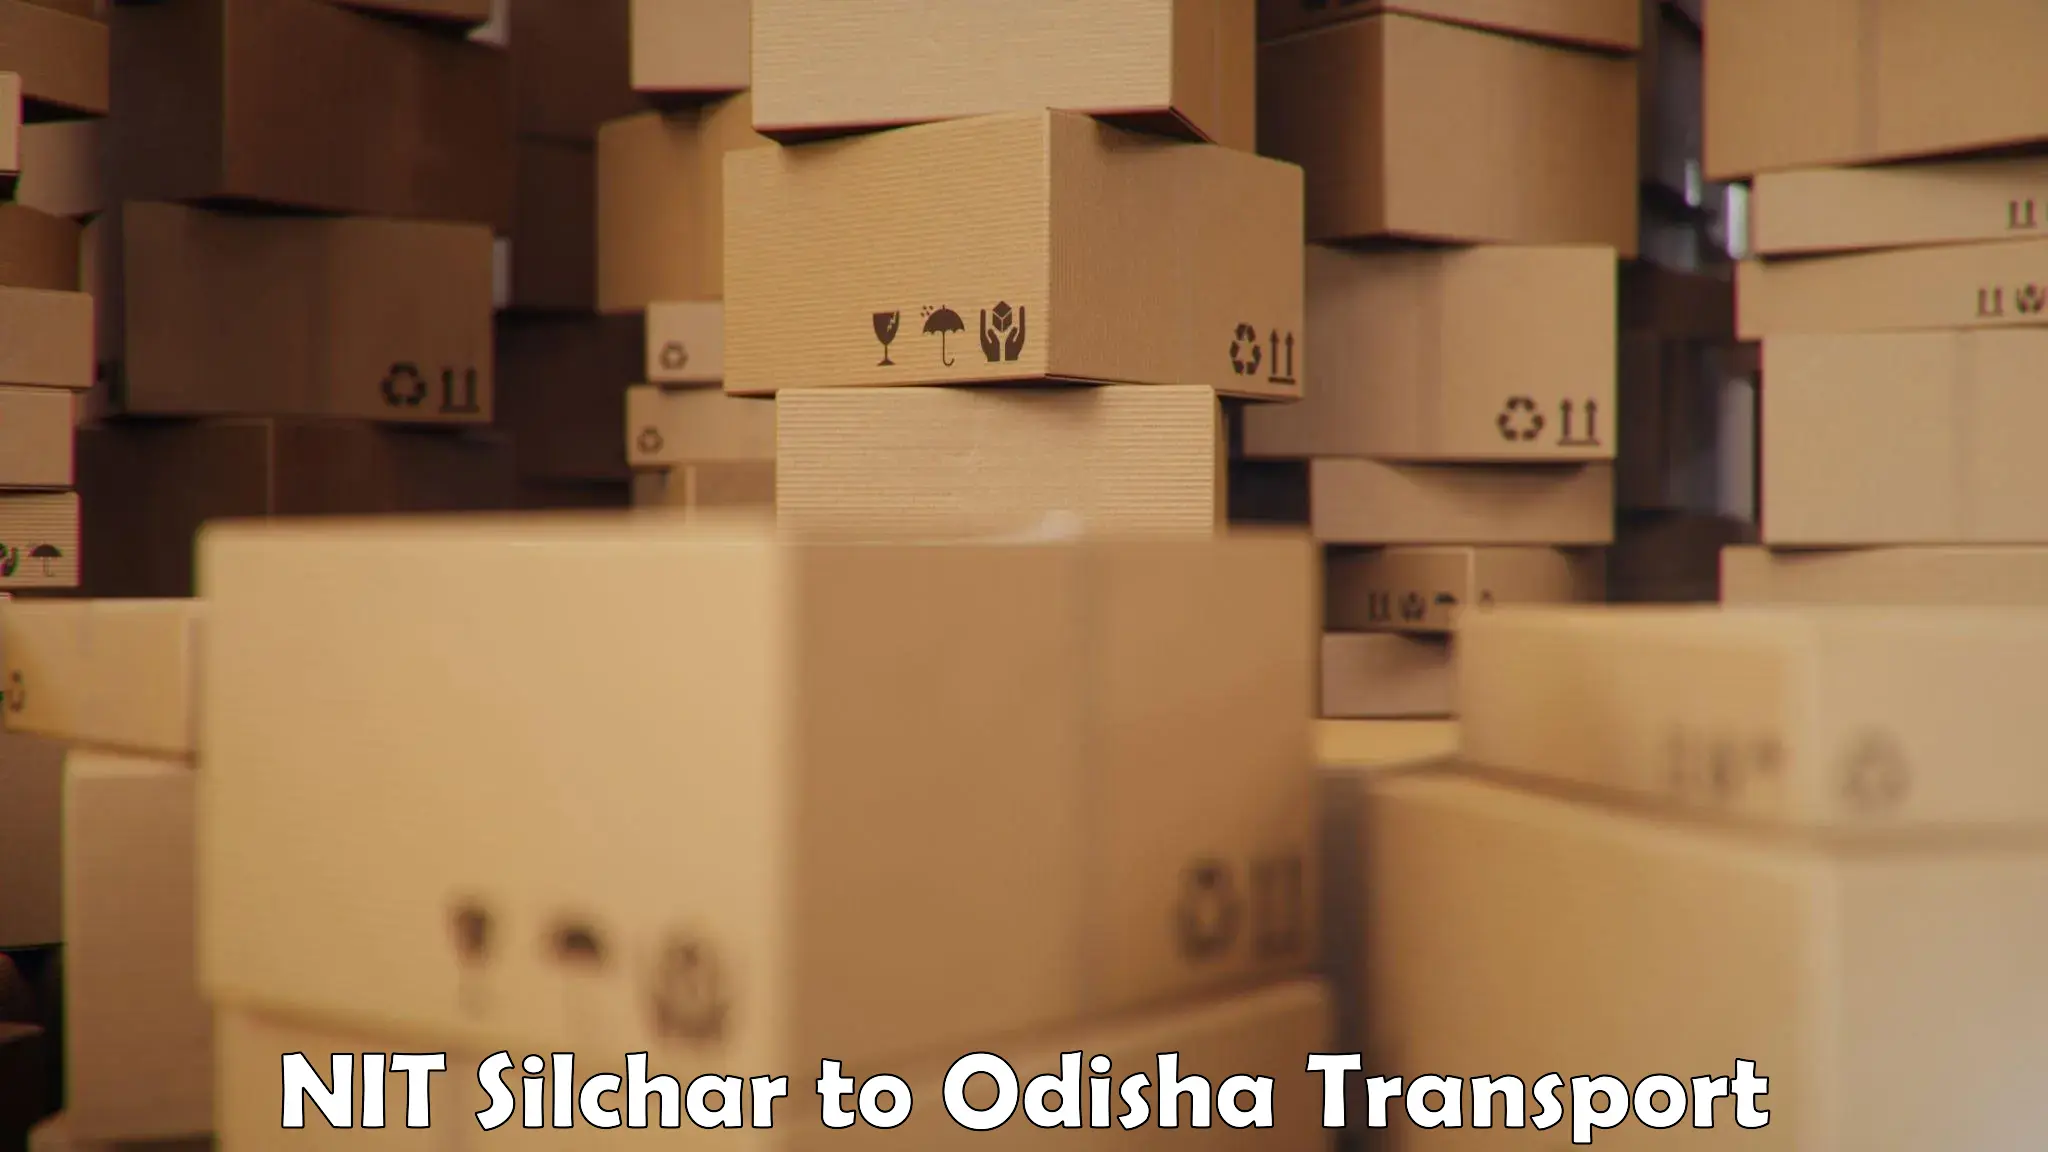 Vehicle transport services NIT Silchar to Champua